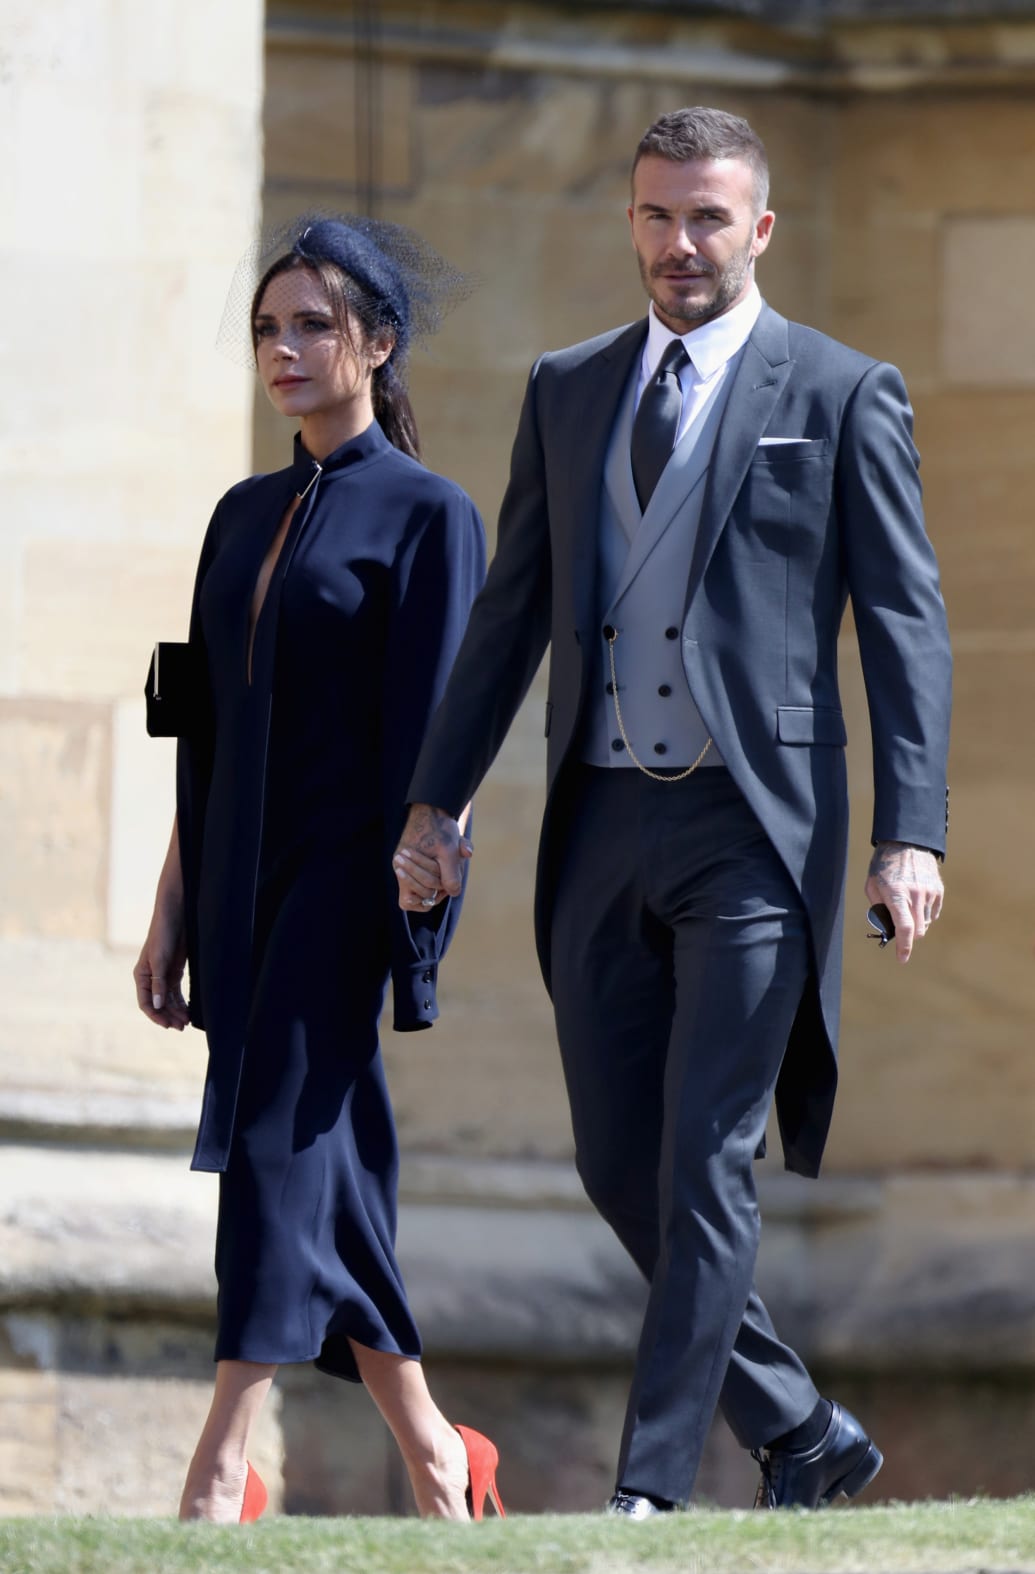 David and Victoria Beckham arrive at St George's Chapel at Windsor Castle for the wedding of Meghan Markle and Prince Harry. Saturday May 19, 2018.